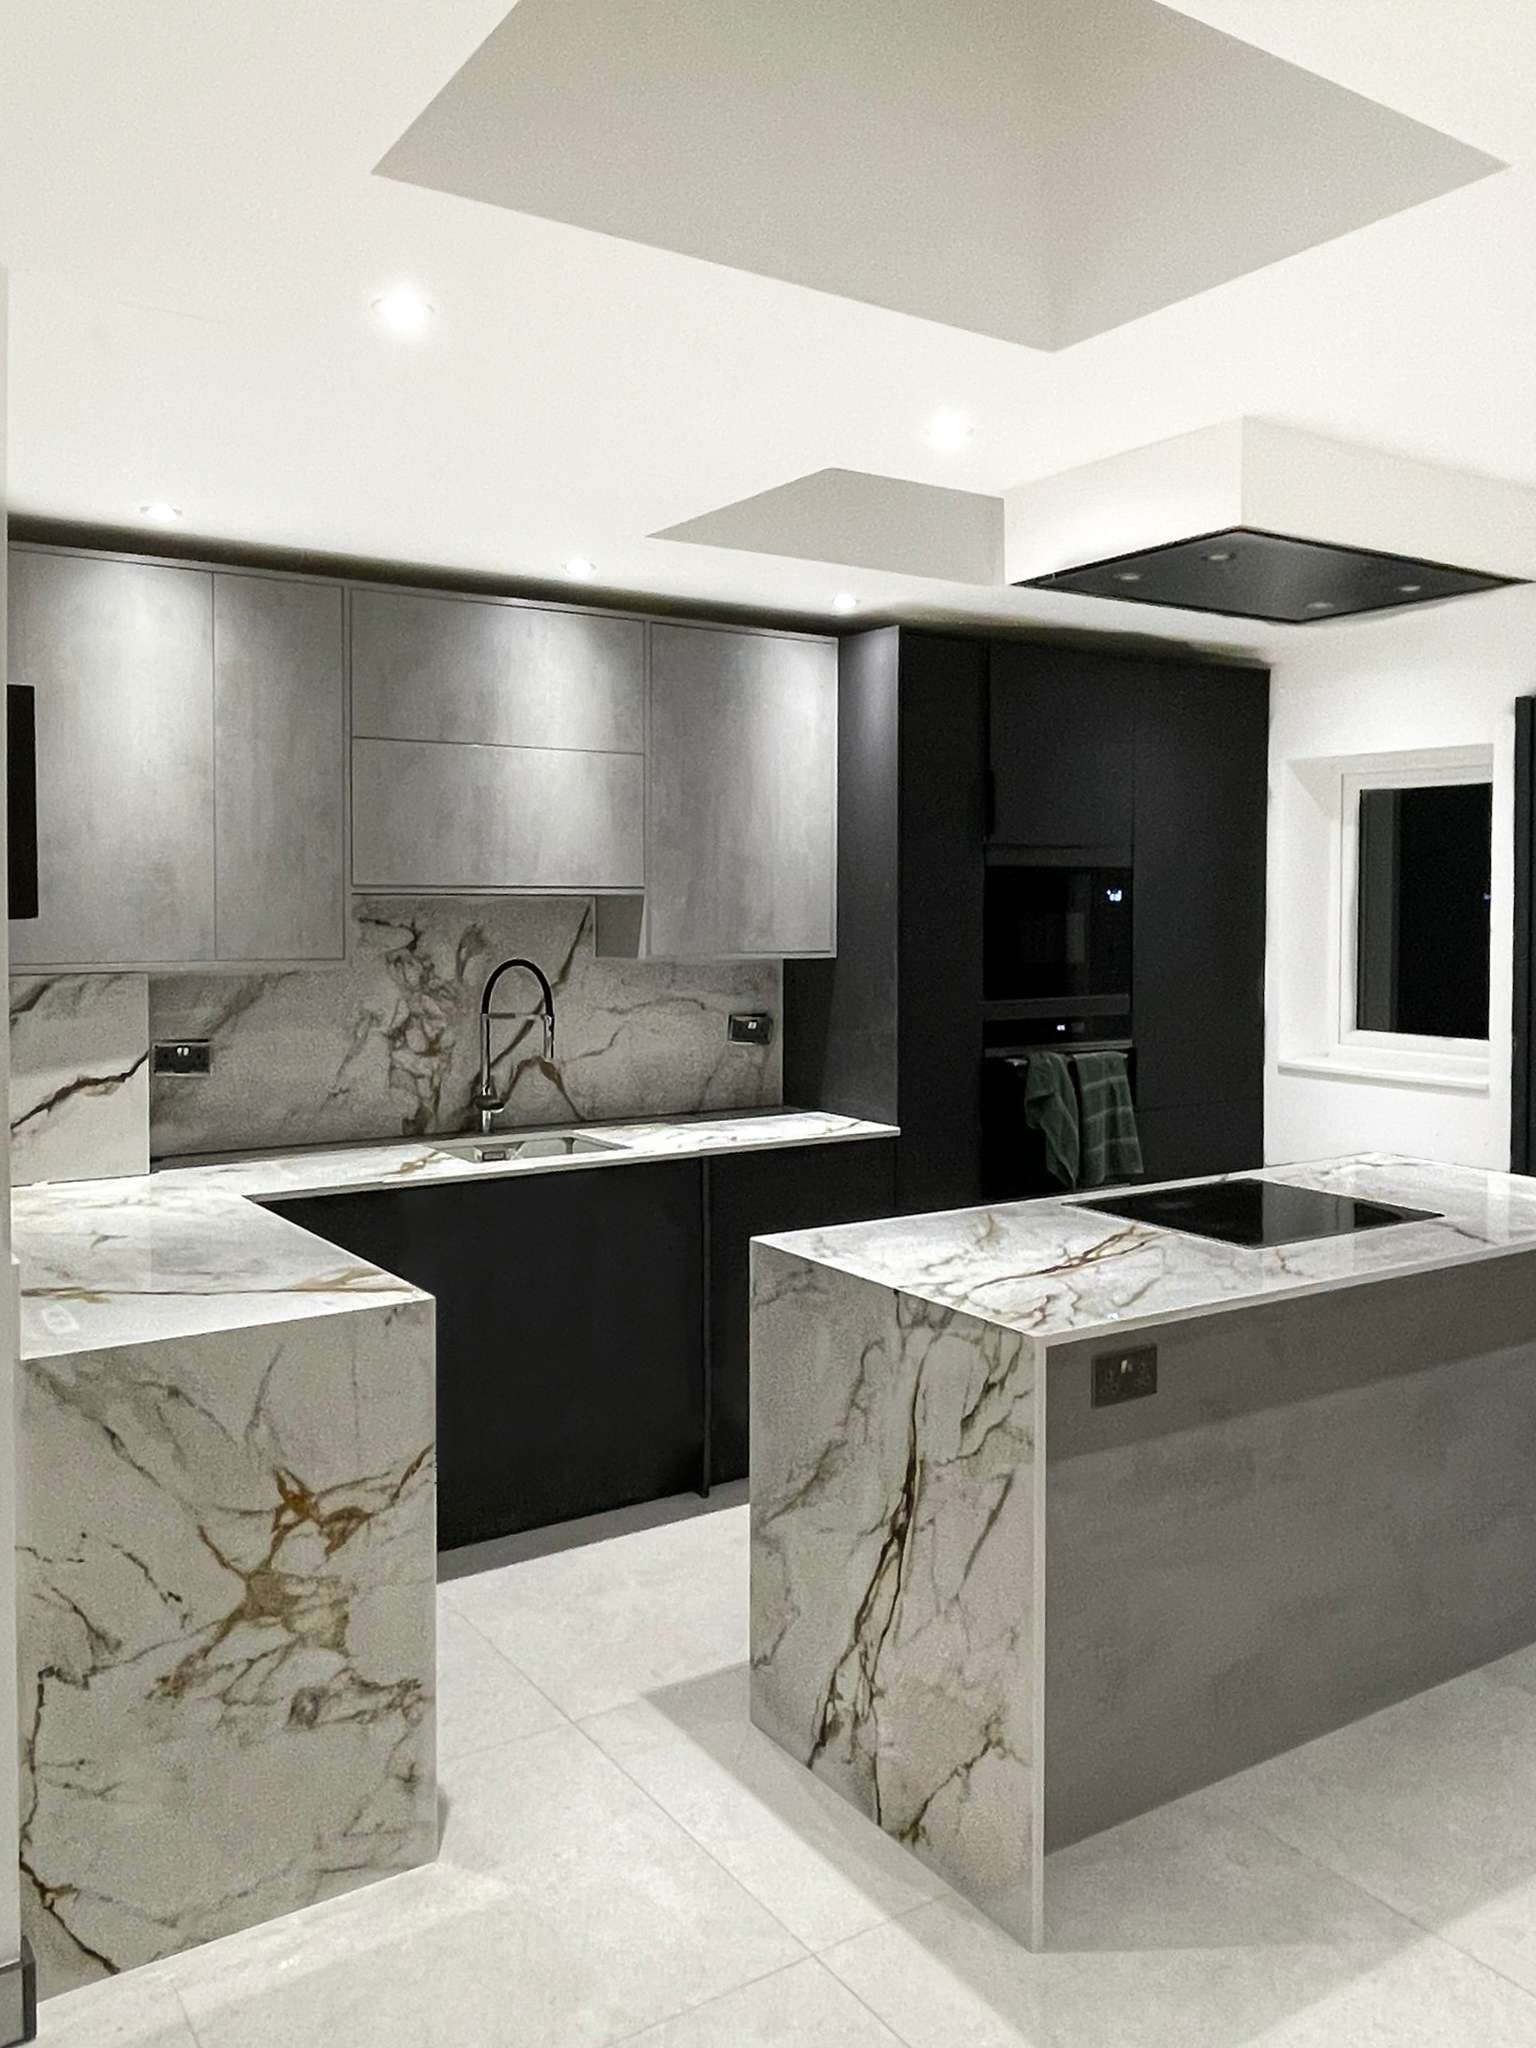 Pioneering the Future of Countertops: JR Stone's Eco-Safe Innovations Beyond Quartz